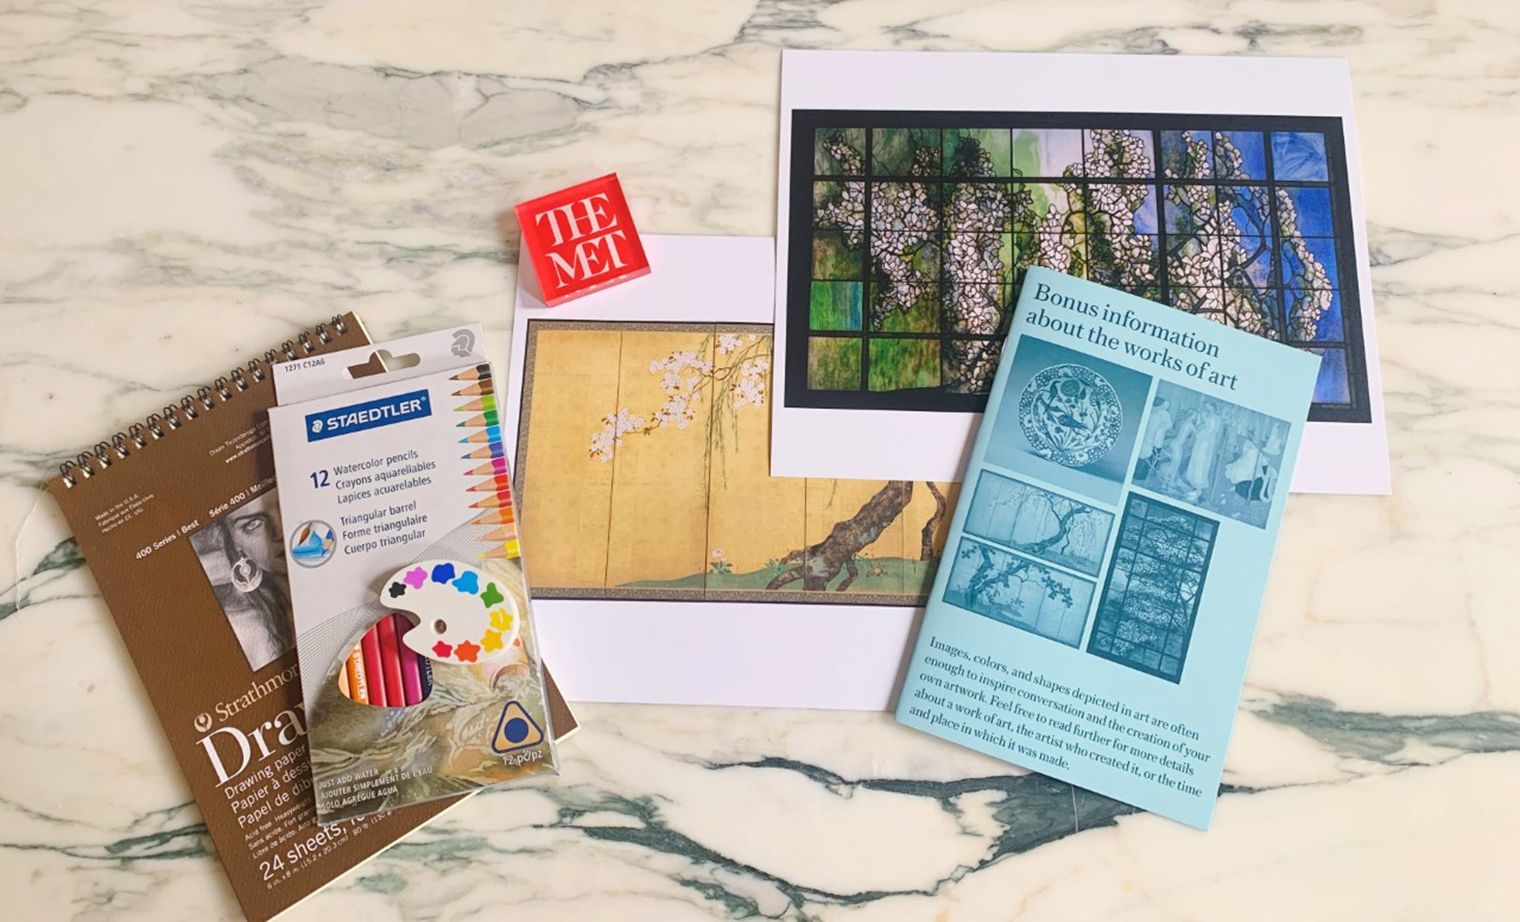 Art supplies, like colored pencils and an eraser, and printed images of art featuring flowering trees in nature spread out across a marble countertop.